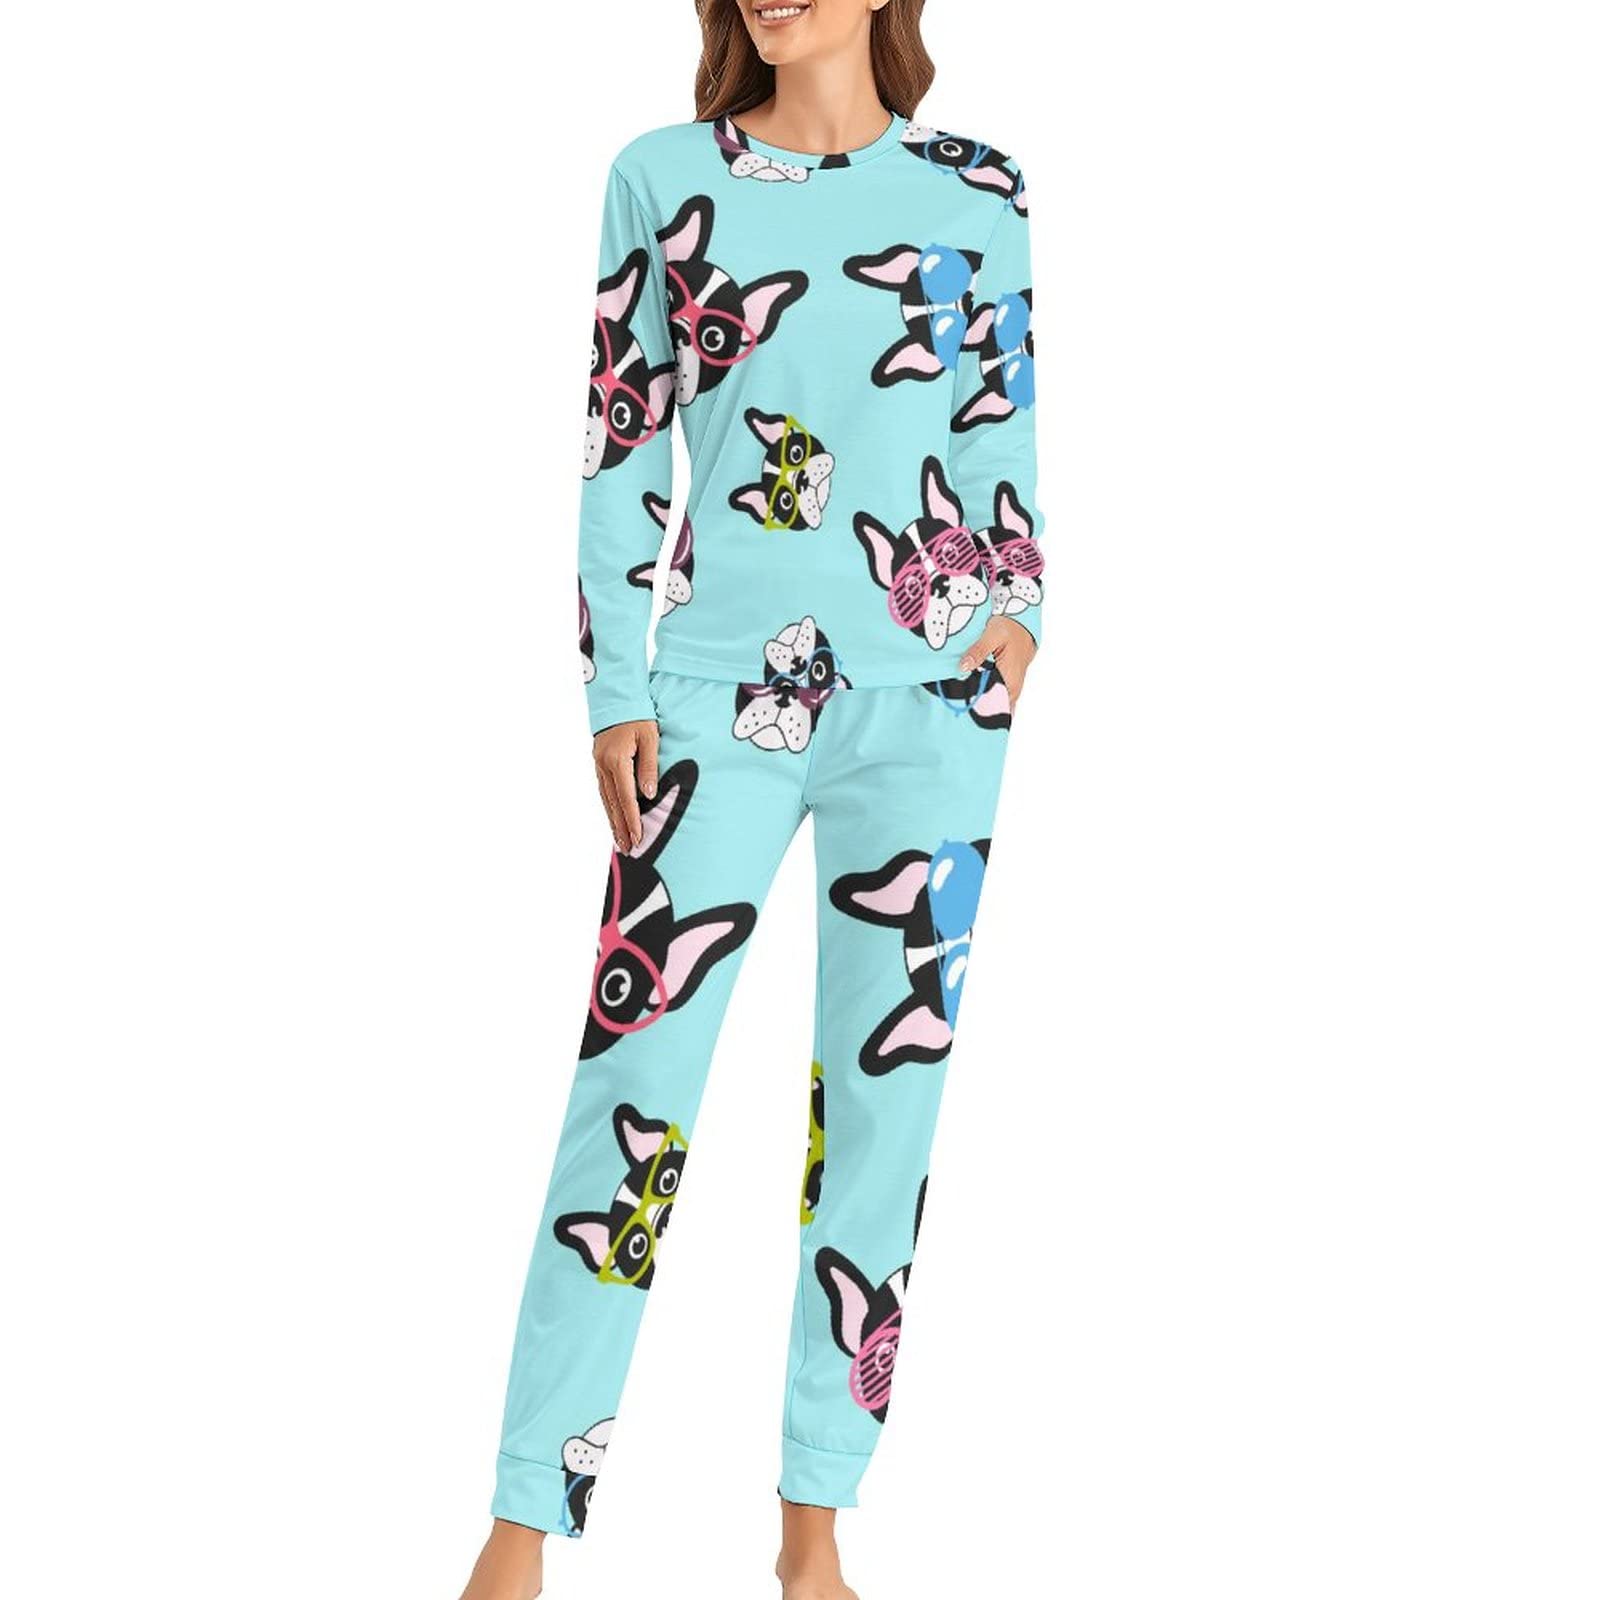 French Bulldogs with Glasses Women's Pajama Sets Two Piece Long Sleeve  Lounge Sleepwear with Pockets 3X-Large